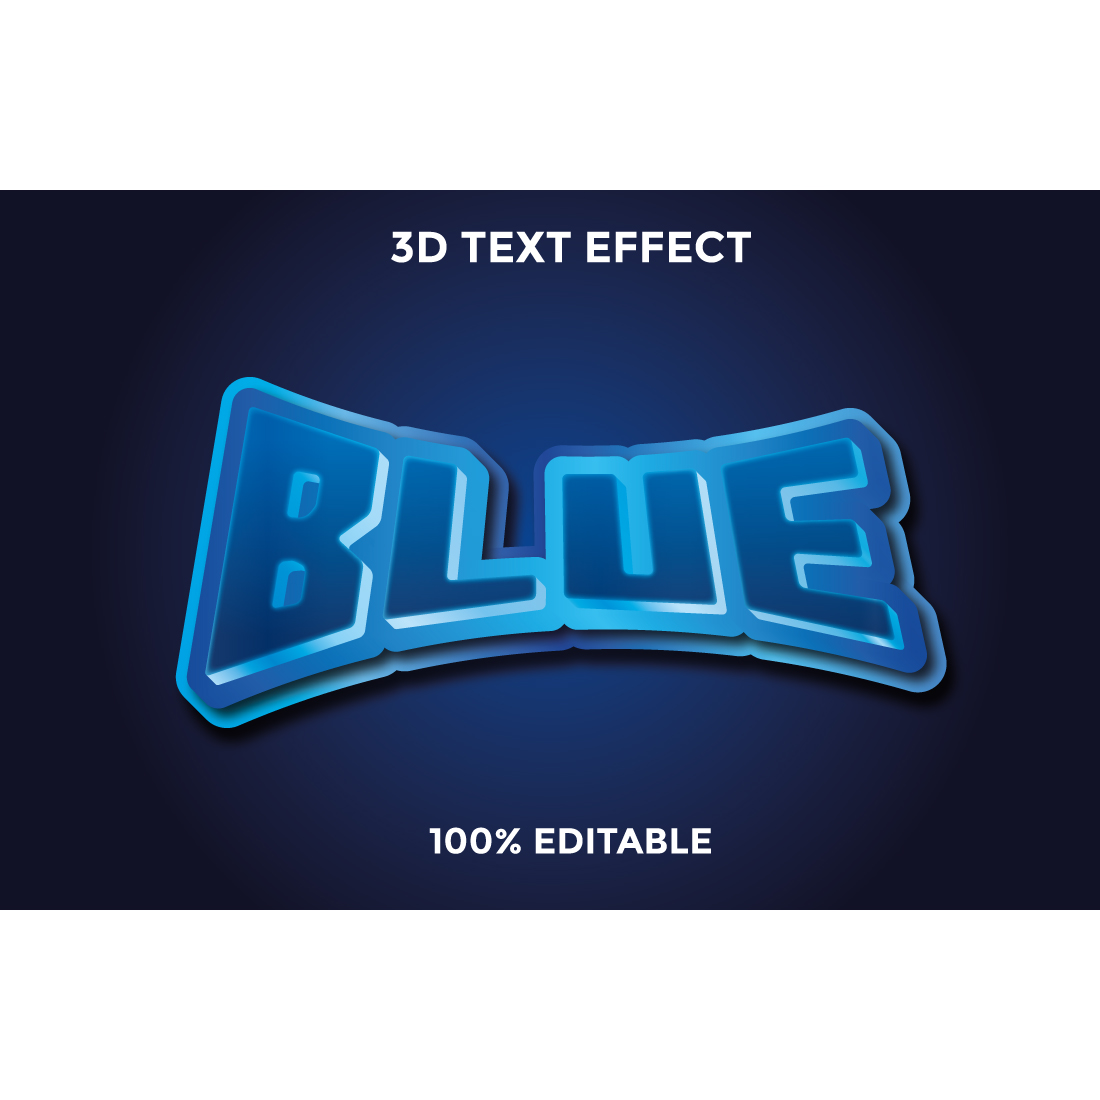 Blue text effect adrk blue background, font, three-dimensional, text, style, editable, letter, typography, word, typeset, blue, alphabet, lettering, glow, gold, shadow, signs cover image.